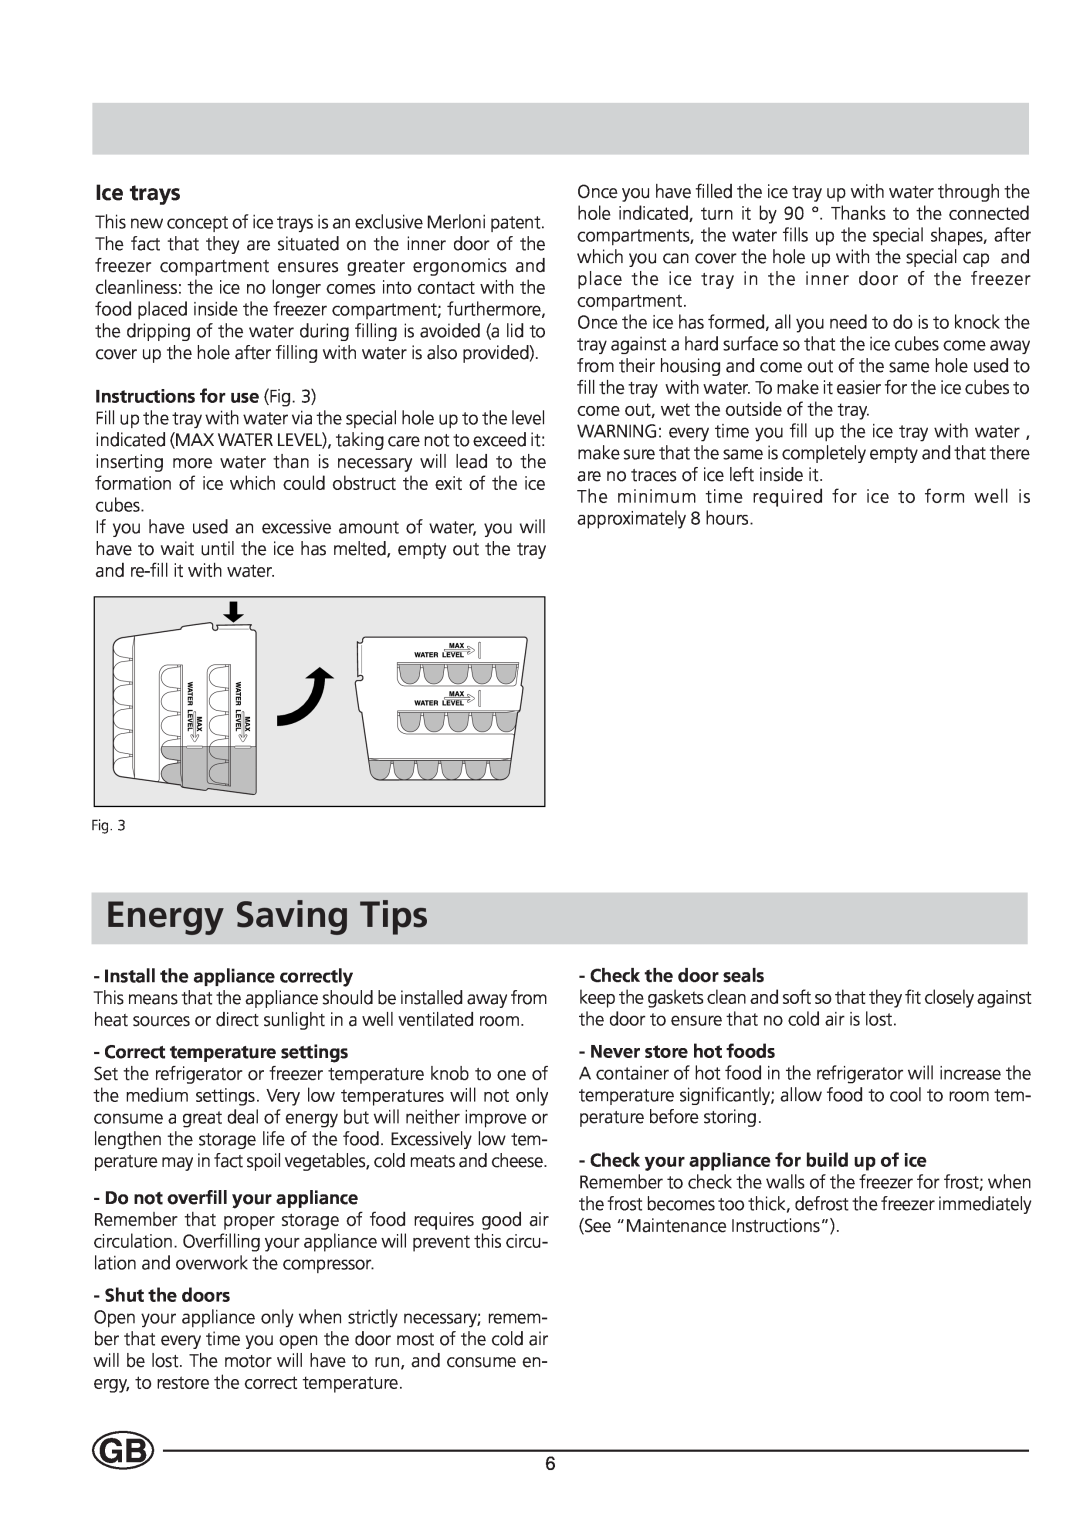 Indesit BA 139 PS Energy Saving Tips, Ice trays, Instructions for use Fig, Install the appliance correctly, Shut the doors 